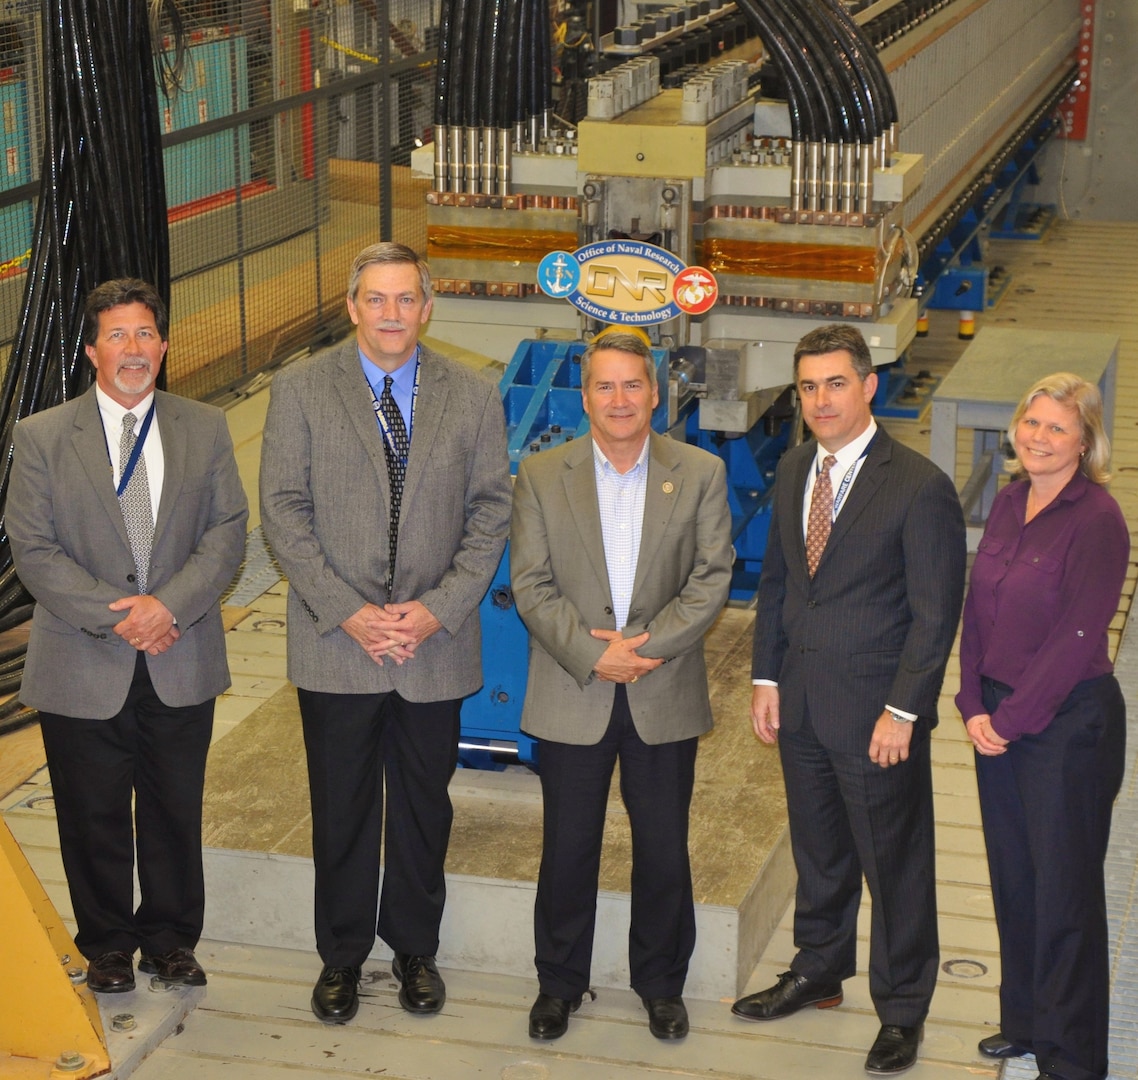 IMAGE: DAHLGREN, Va. (April 24, 2018) - U.S. Rep. Jody Hice, (R-Ga.) is pictured with Naval Surface Warfare Center Dahlgren Division (NSWCDD) leaders in front of the Navy's electromagnetic railgun laboratory launcher. The congressman - who was briefed by NSWCDD engineers on electromagnetic launchers and hypervelocity projectiles - observed the launcher fire a projectile in a demonstration. Hice also watched a laser weapon demonstrated during briefings on directed energy weapons and development. Throughout his tour of NSWCDD facilities, Hice saw the command's capability to develop and integrate complex warfare systems, including the ability to incorporate electric weapons technology into existing and future fighting forces and platforms. Standing left to right: Stephen Malyevac, NSWCDD distinguished scientist for surface engagement; Chester Petry, NSWCDD electromagnetic railgun lead systems engineer; U.S. Rep. Jody Hice; Dale Sisson, NSWCDD deputy technical director; and Stephanie Hornbaker, NSWCDD Gun and Electric Weapon Systems department head.  (U.S. Navy photo by John Joyce/Released)